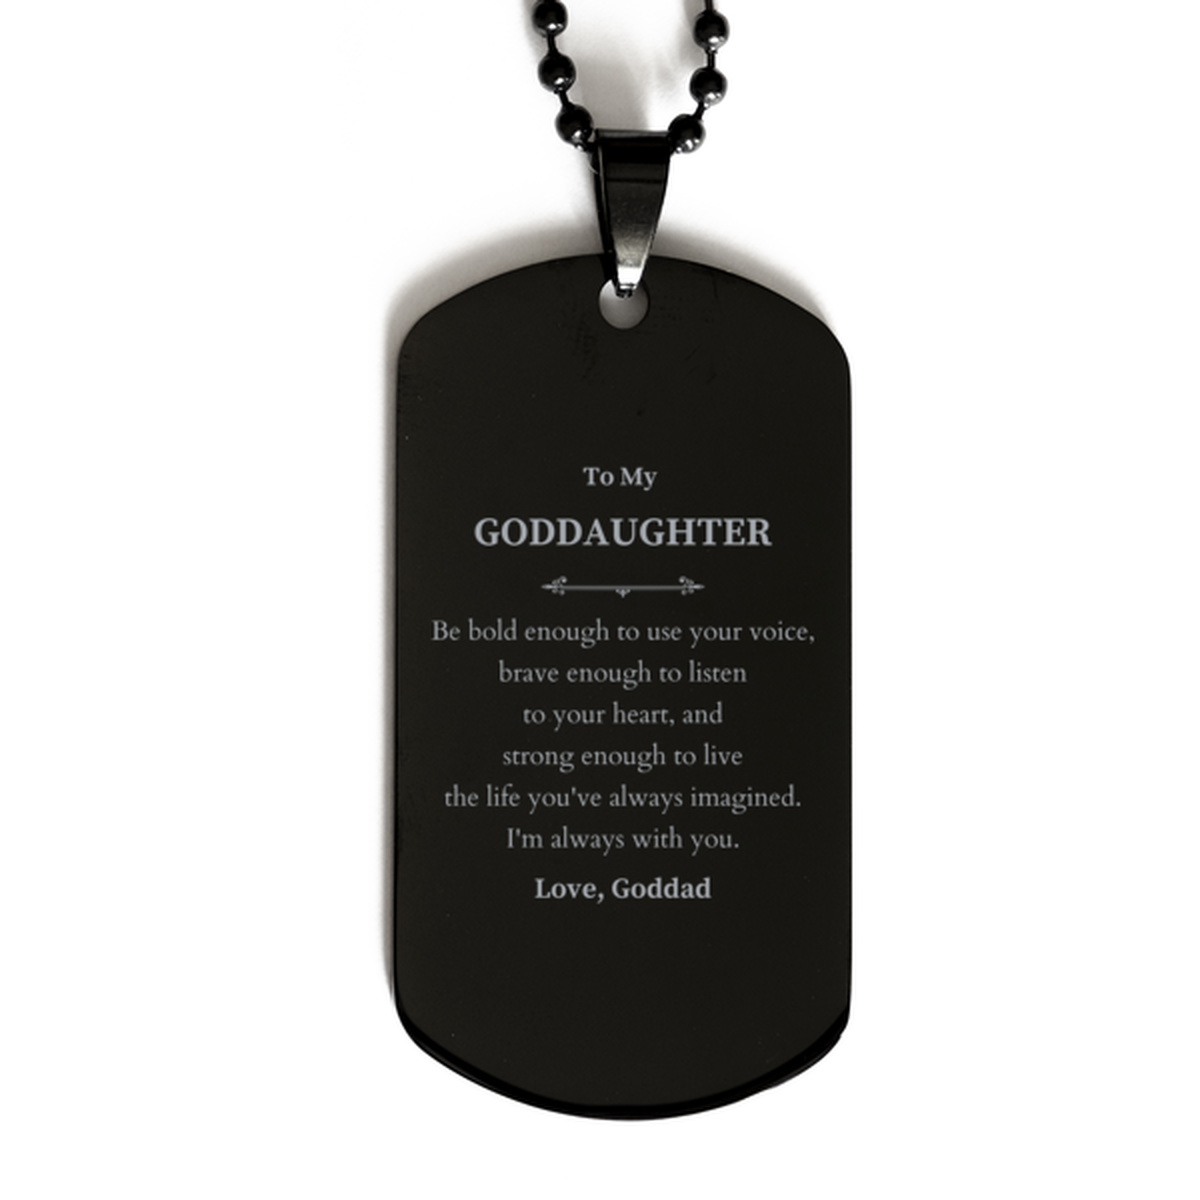 Keepsake Goddaughter Black Dog Tag Gift Idea Graduation Christmas Birthday Goddaughter from Goddad, Goddaughter Be bold enough to use your voice, brave enough to listen to your heart. Love, Goddad